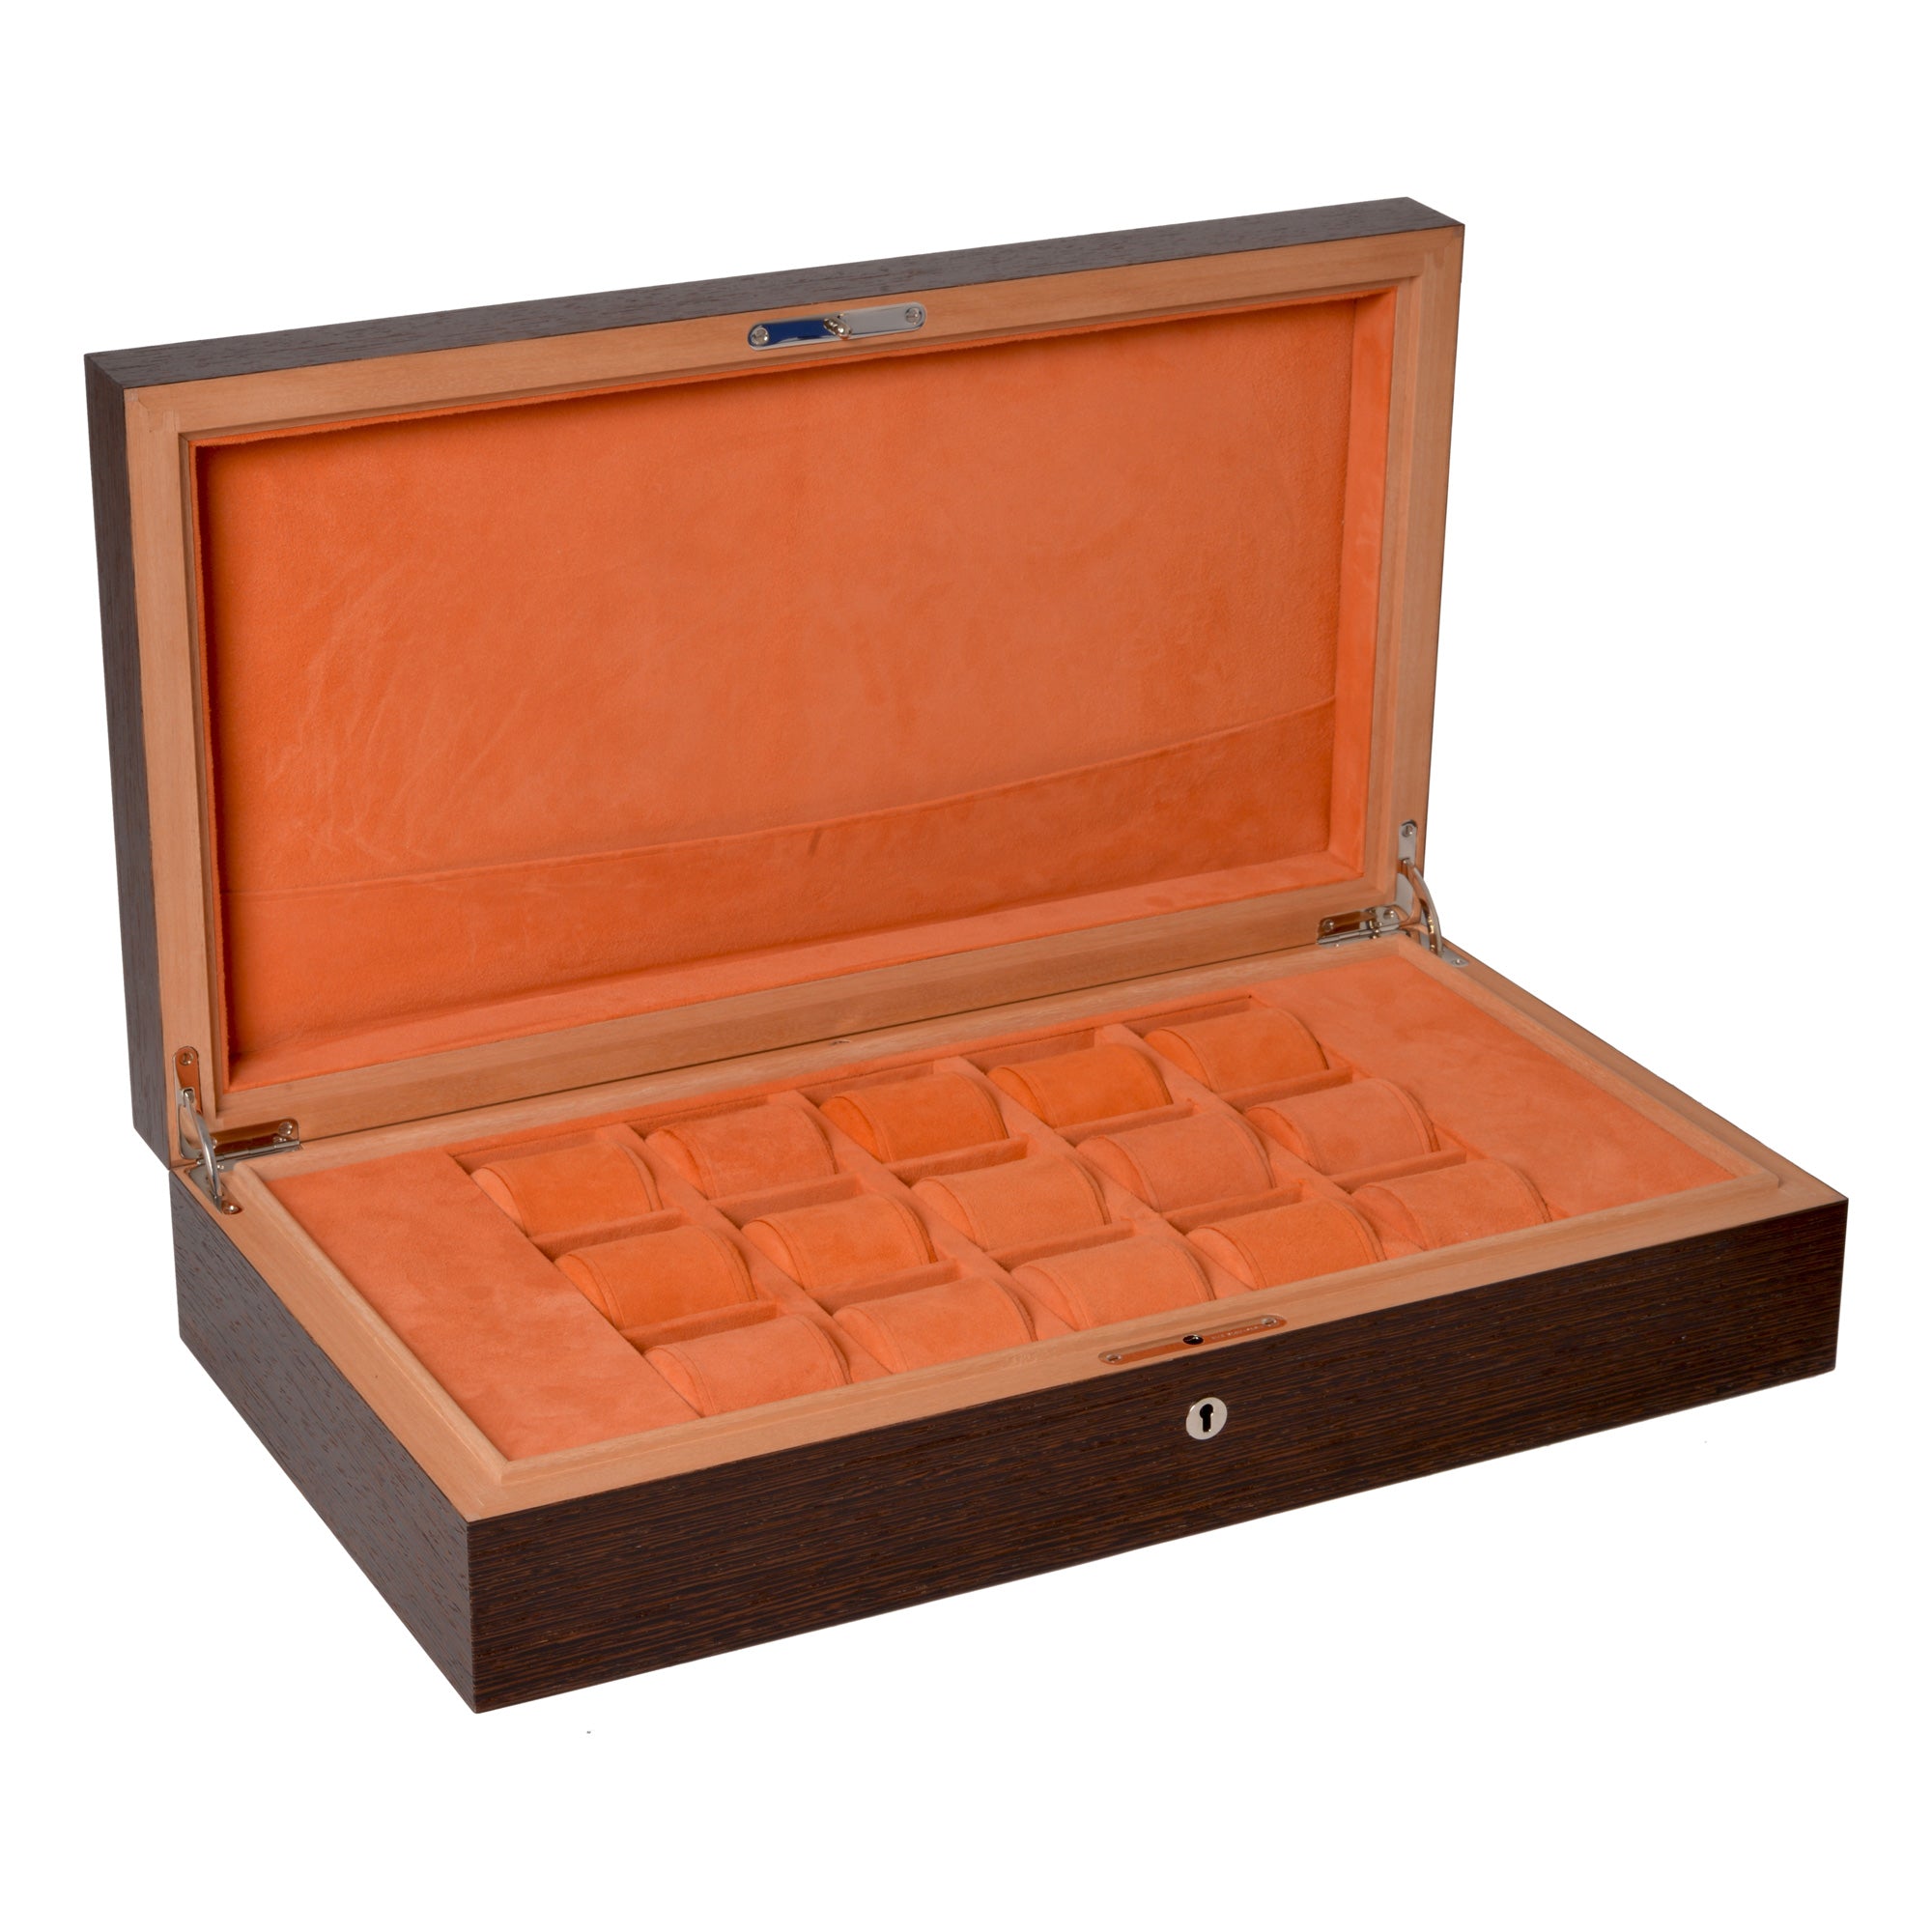 "Classic" - Wenge - Box of 15 watches